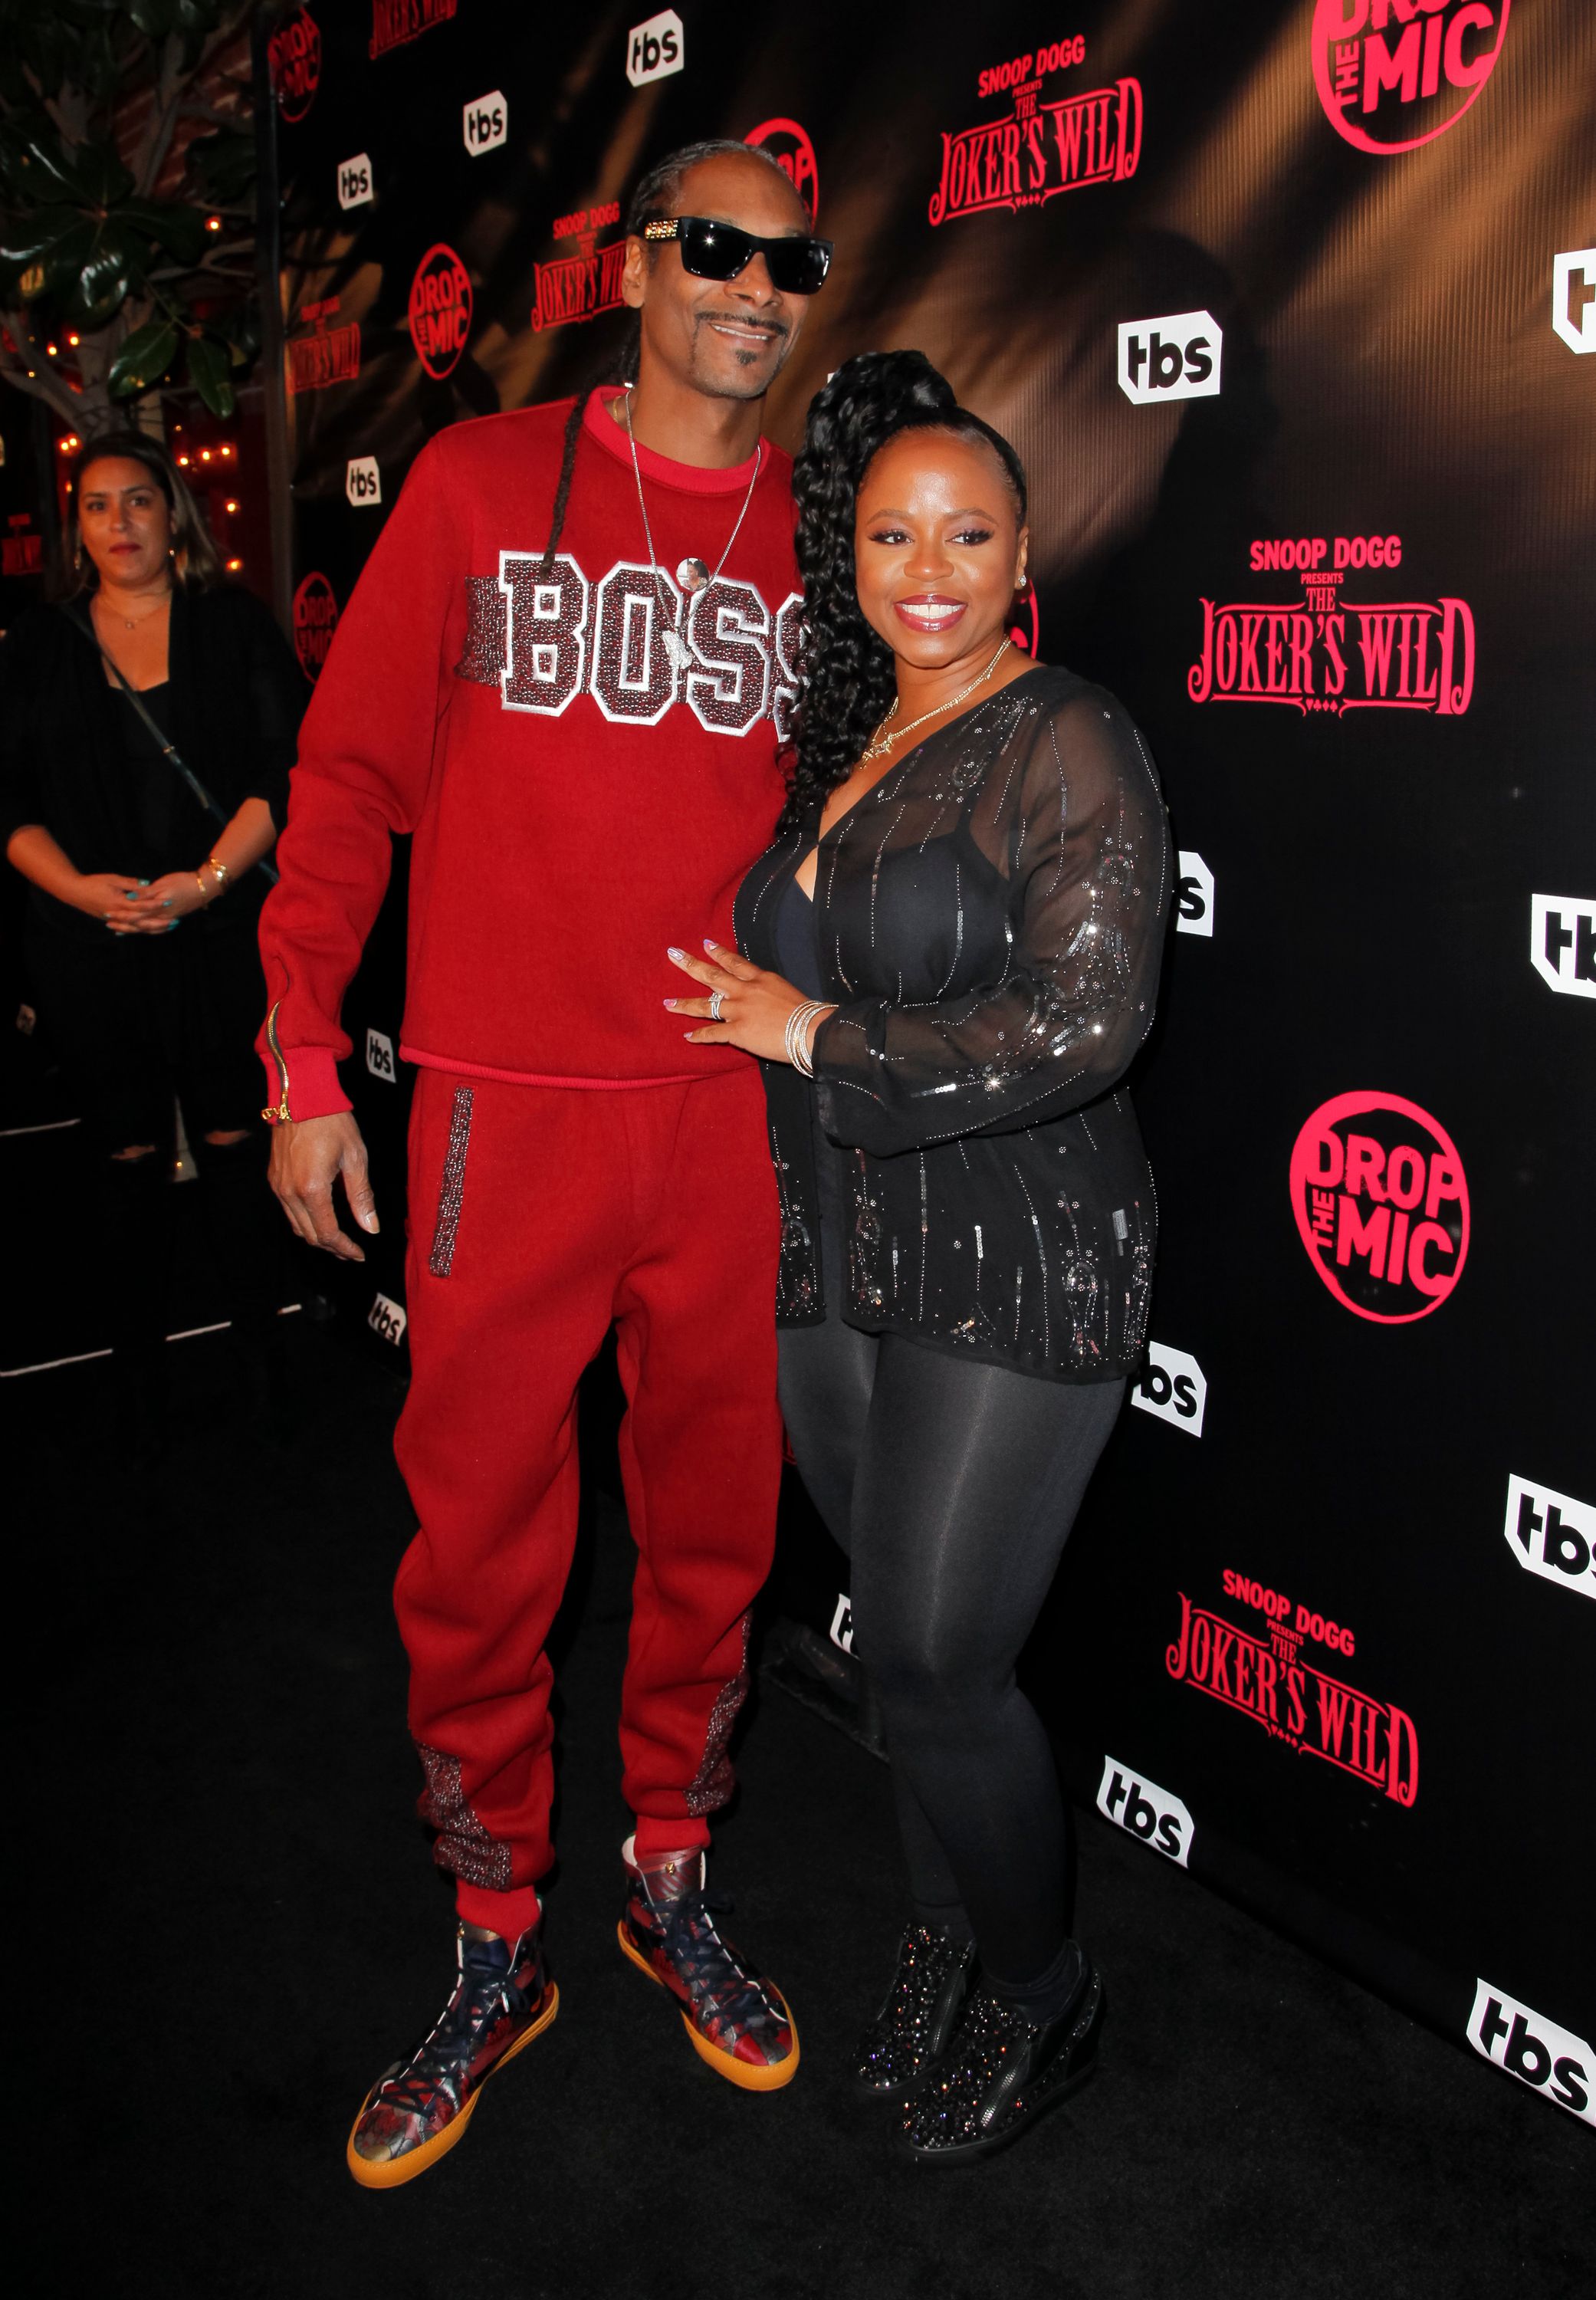 Snoop Dogg and Shante Broadus at the premiere for TBS's 'Drop The Mic' and 'The Joker's Wild' at The Highlight Room on October 11, 2017. | Photo: Getty Images